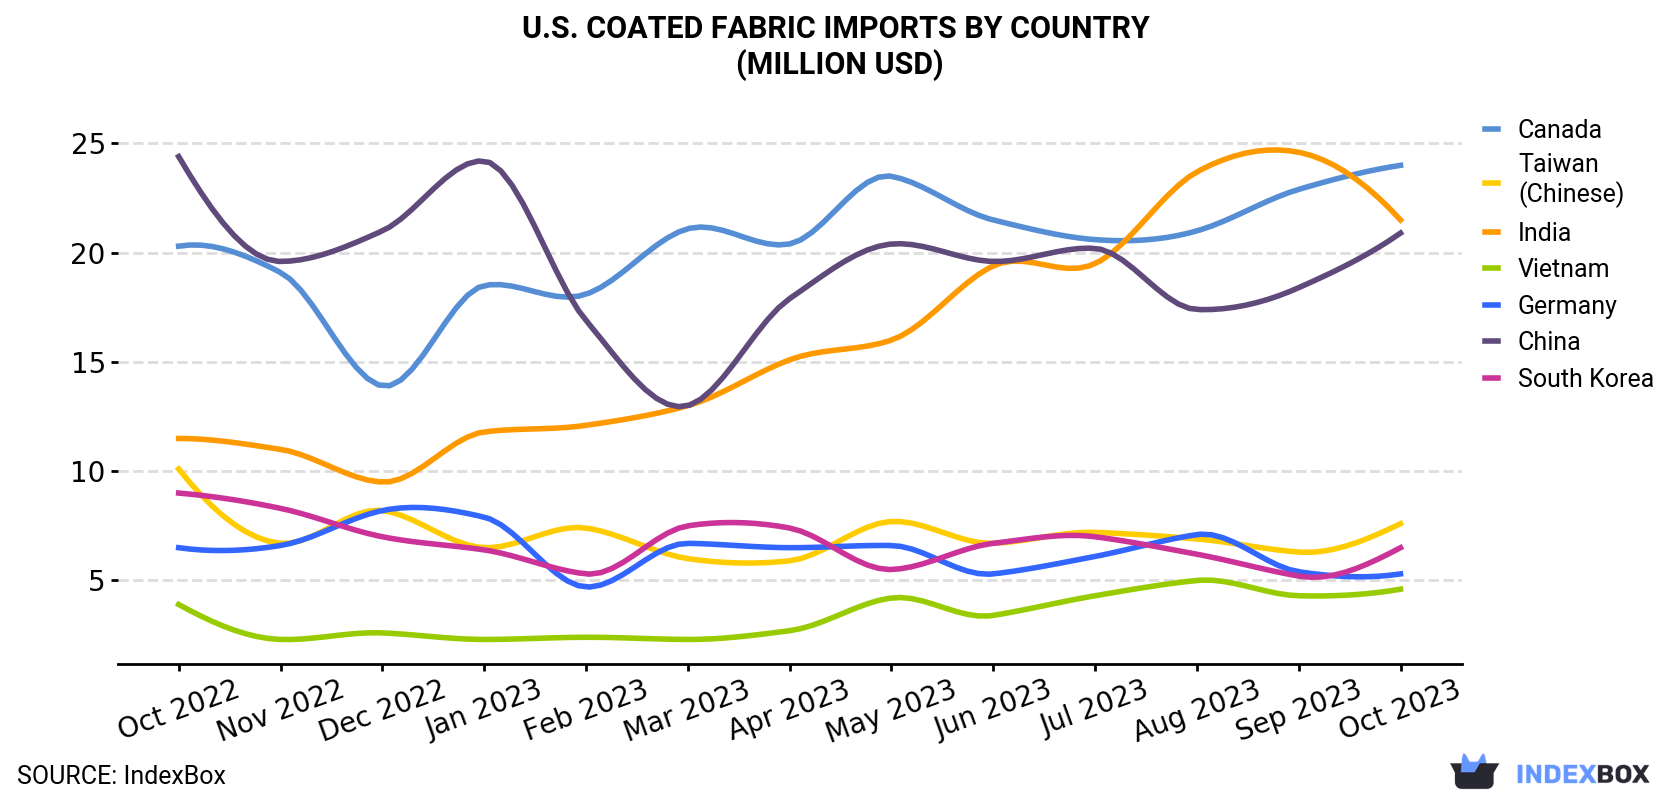 U.S. Coated Fabric Imports By Country (Million USD)